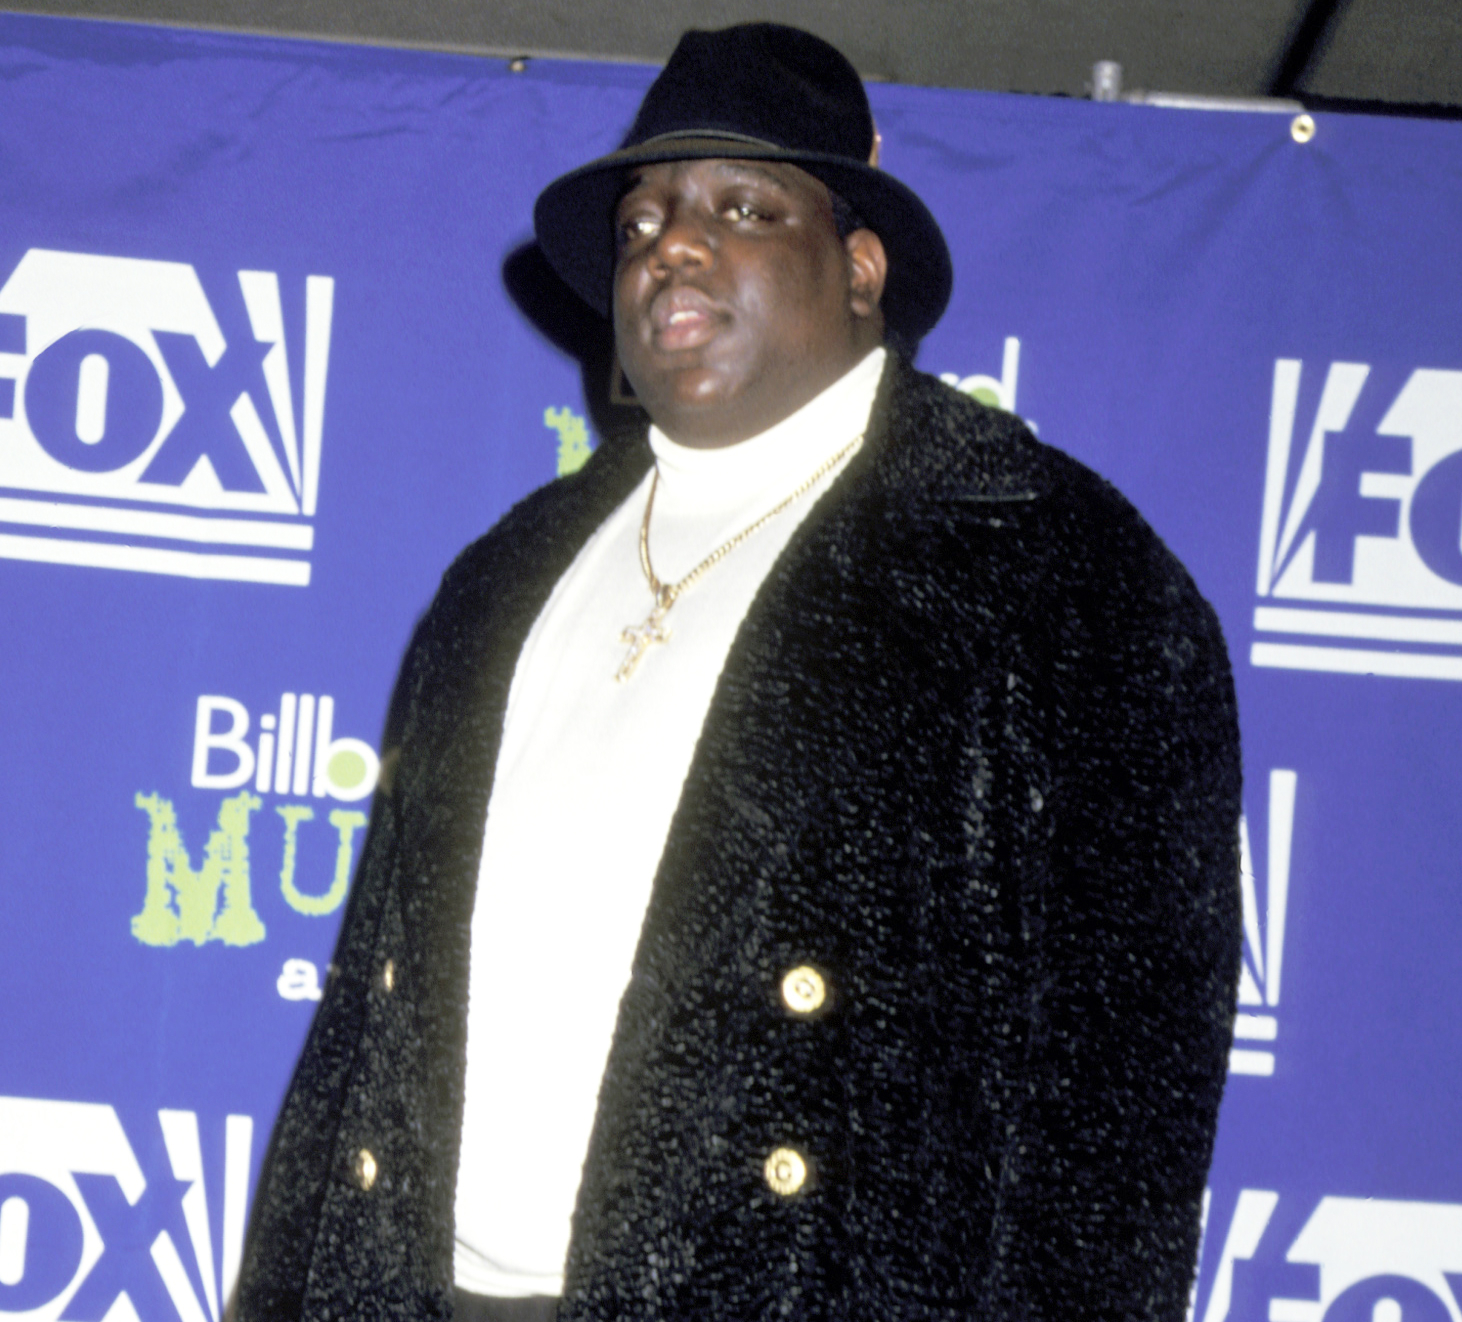 Notorious B.I.G. Killed - 1997, Today In History